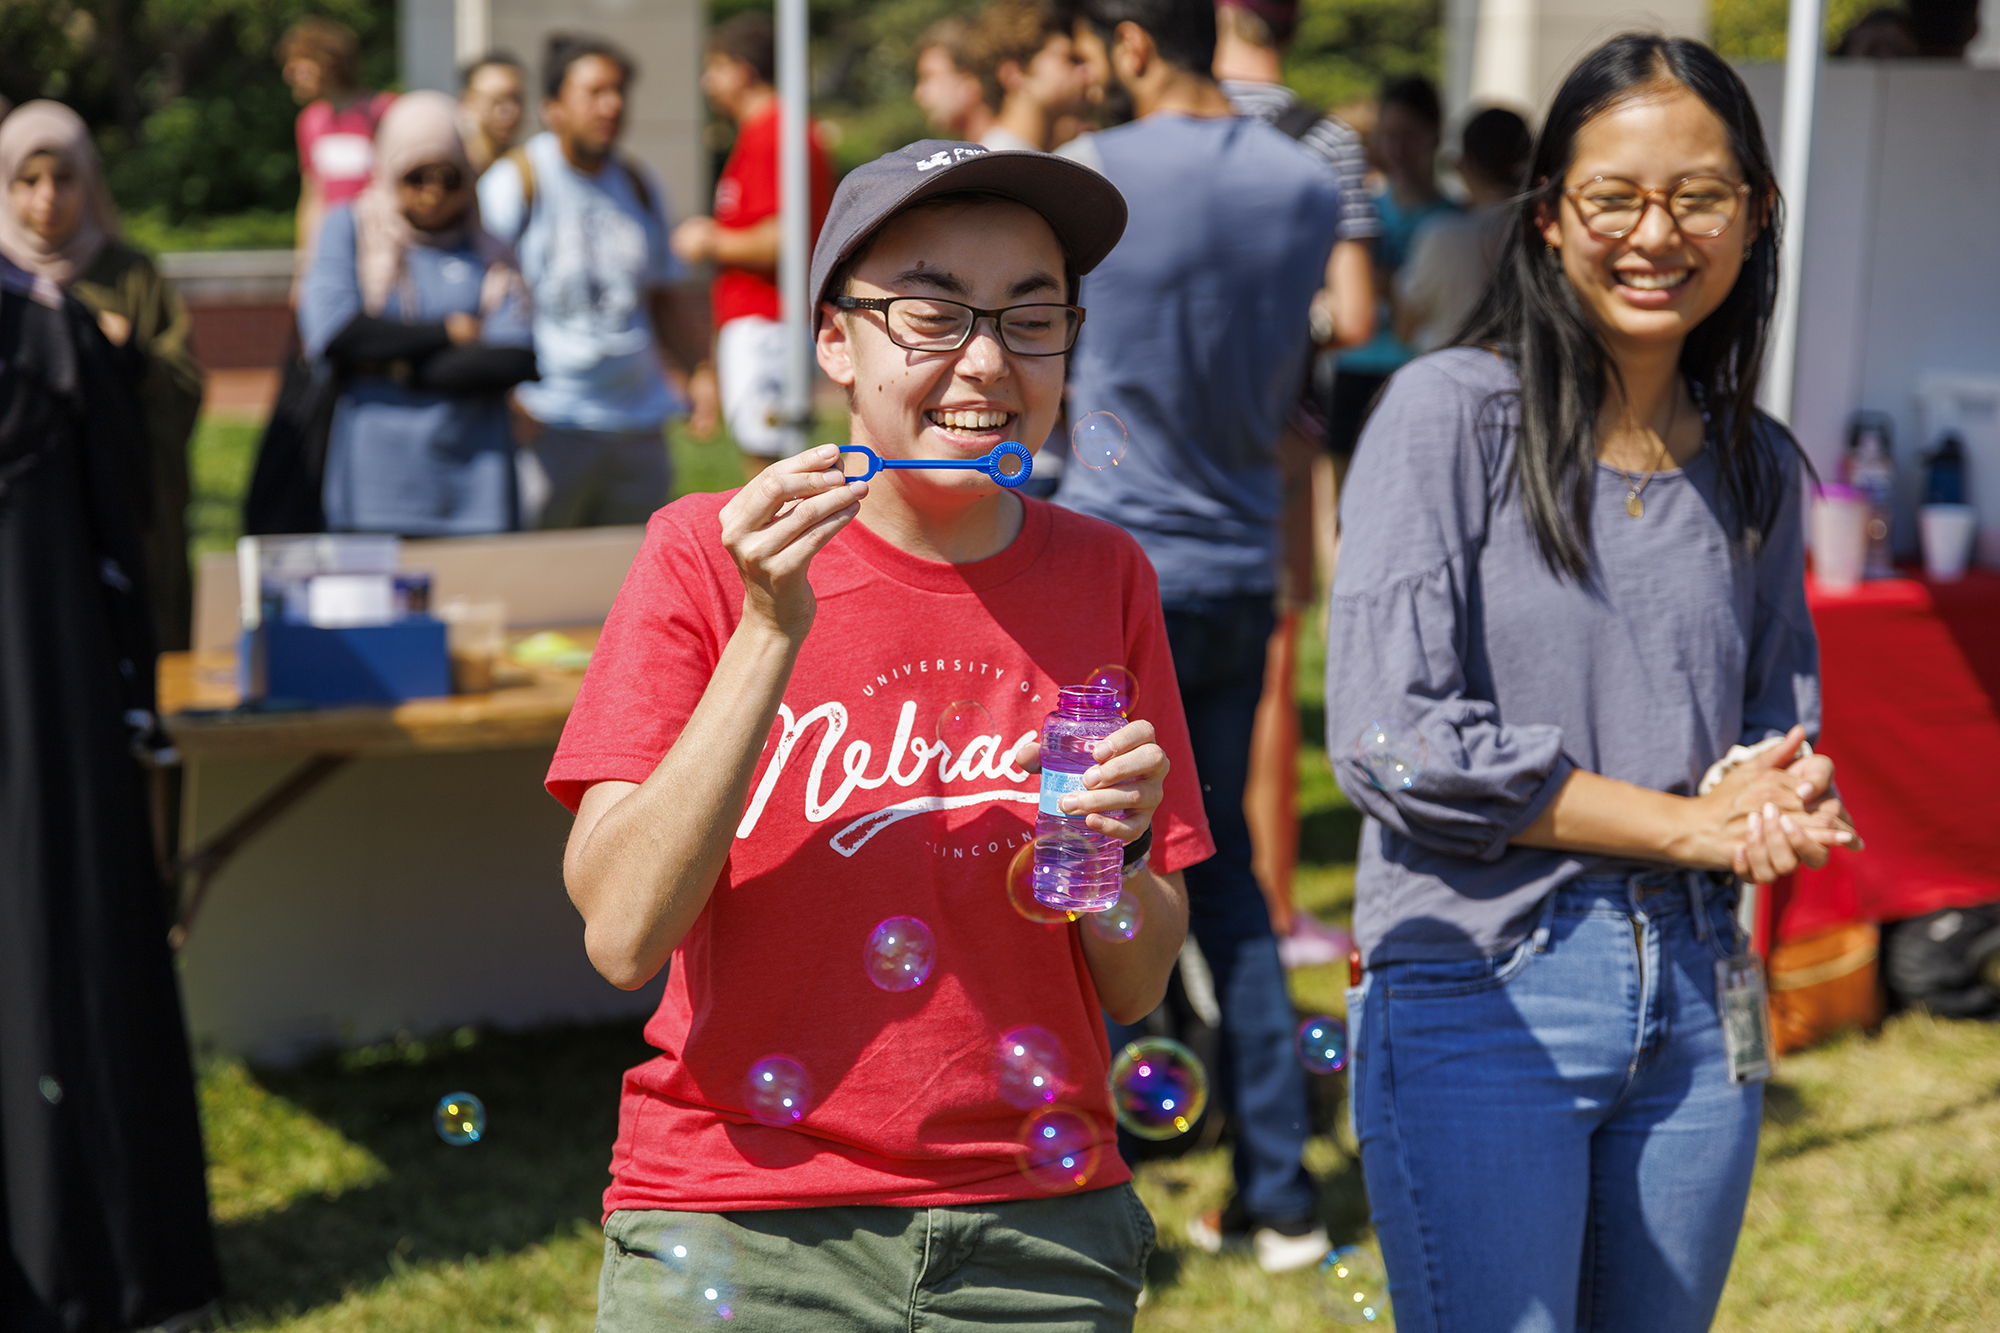 Sarah Roscoe blows bubbles at the UNL Christian Graduate Student table during the Club Fair. August 24, 2022. [Mike Jackson | Student Affairs]